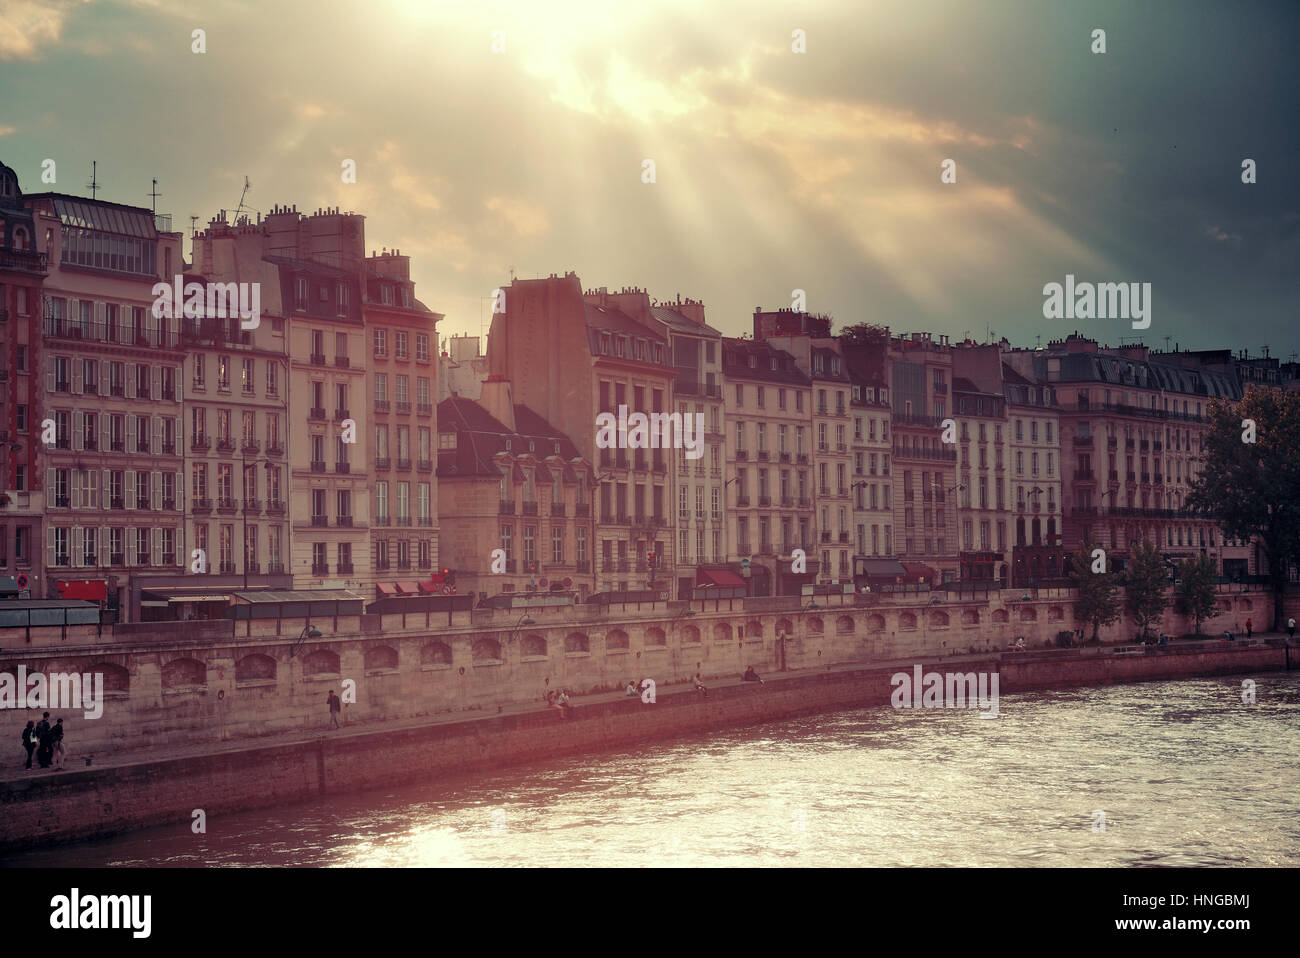 Paris city view with historical architecture. Stock Photo